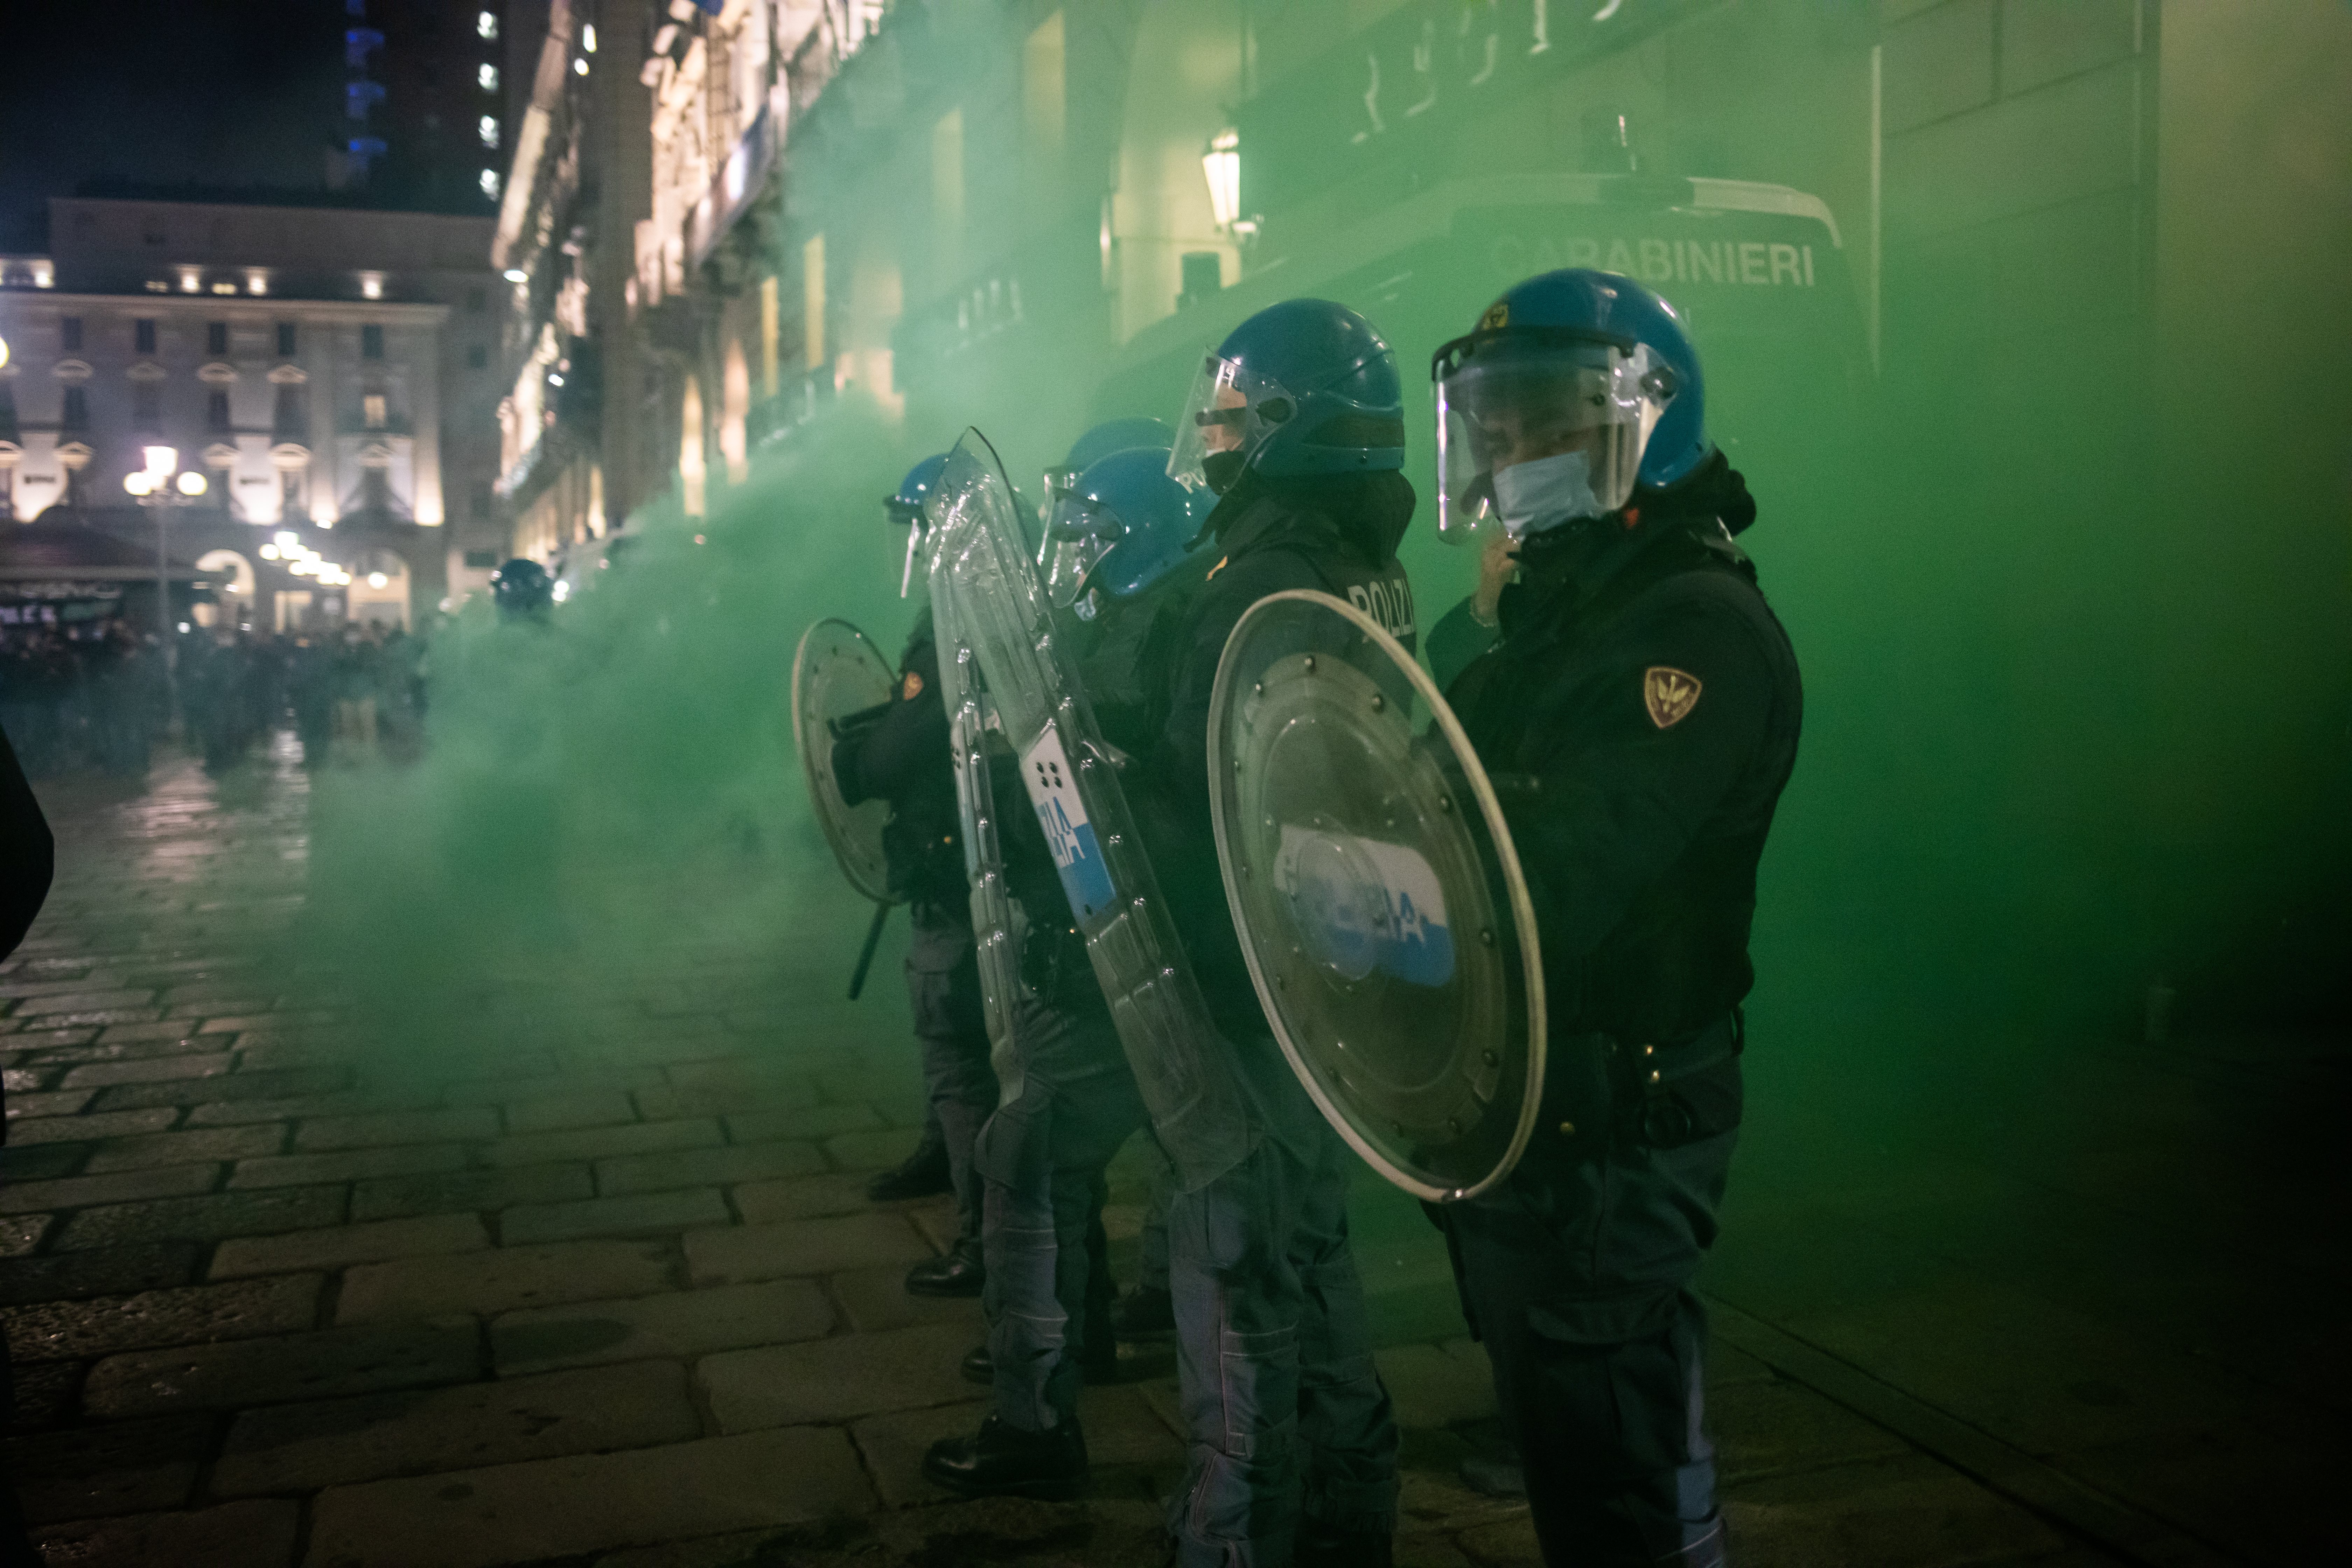 Protest Continues in Turin Against The Government and COVID-19 Restrictions